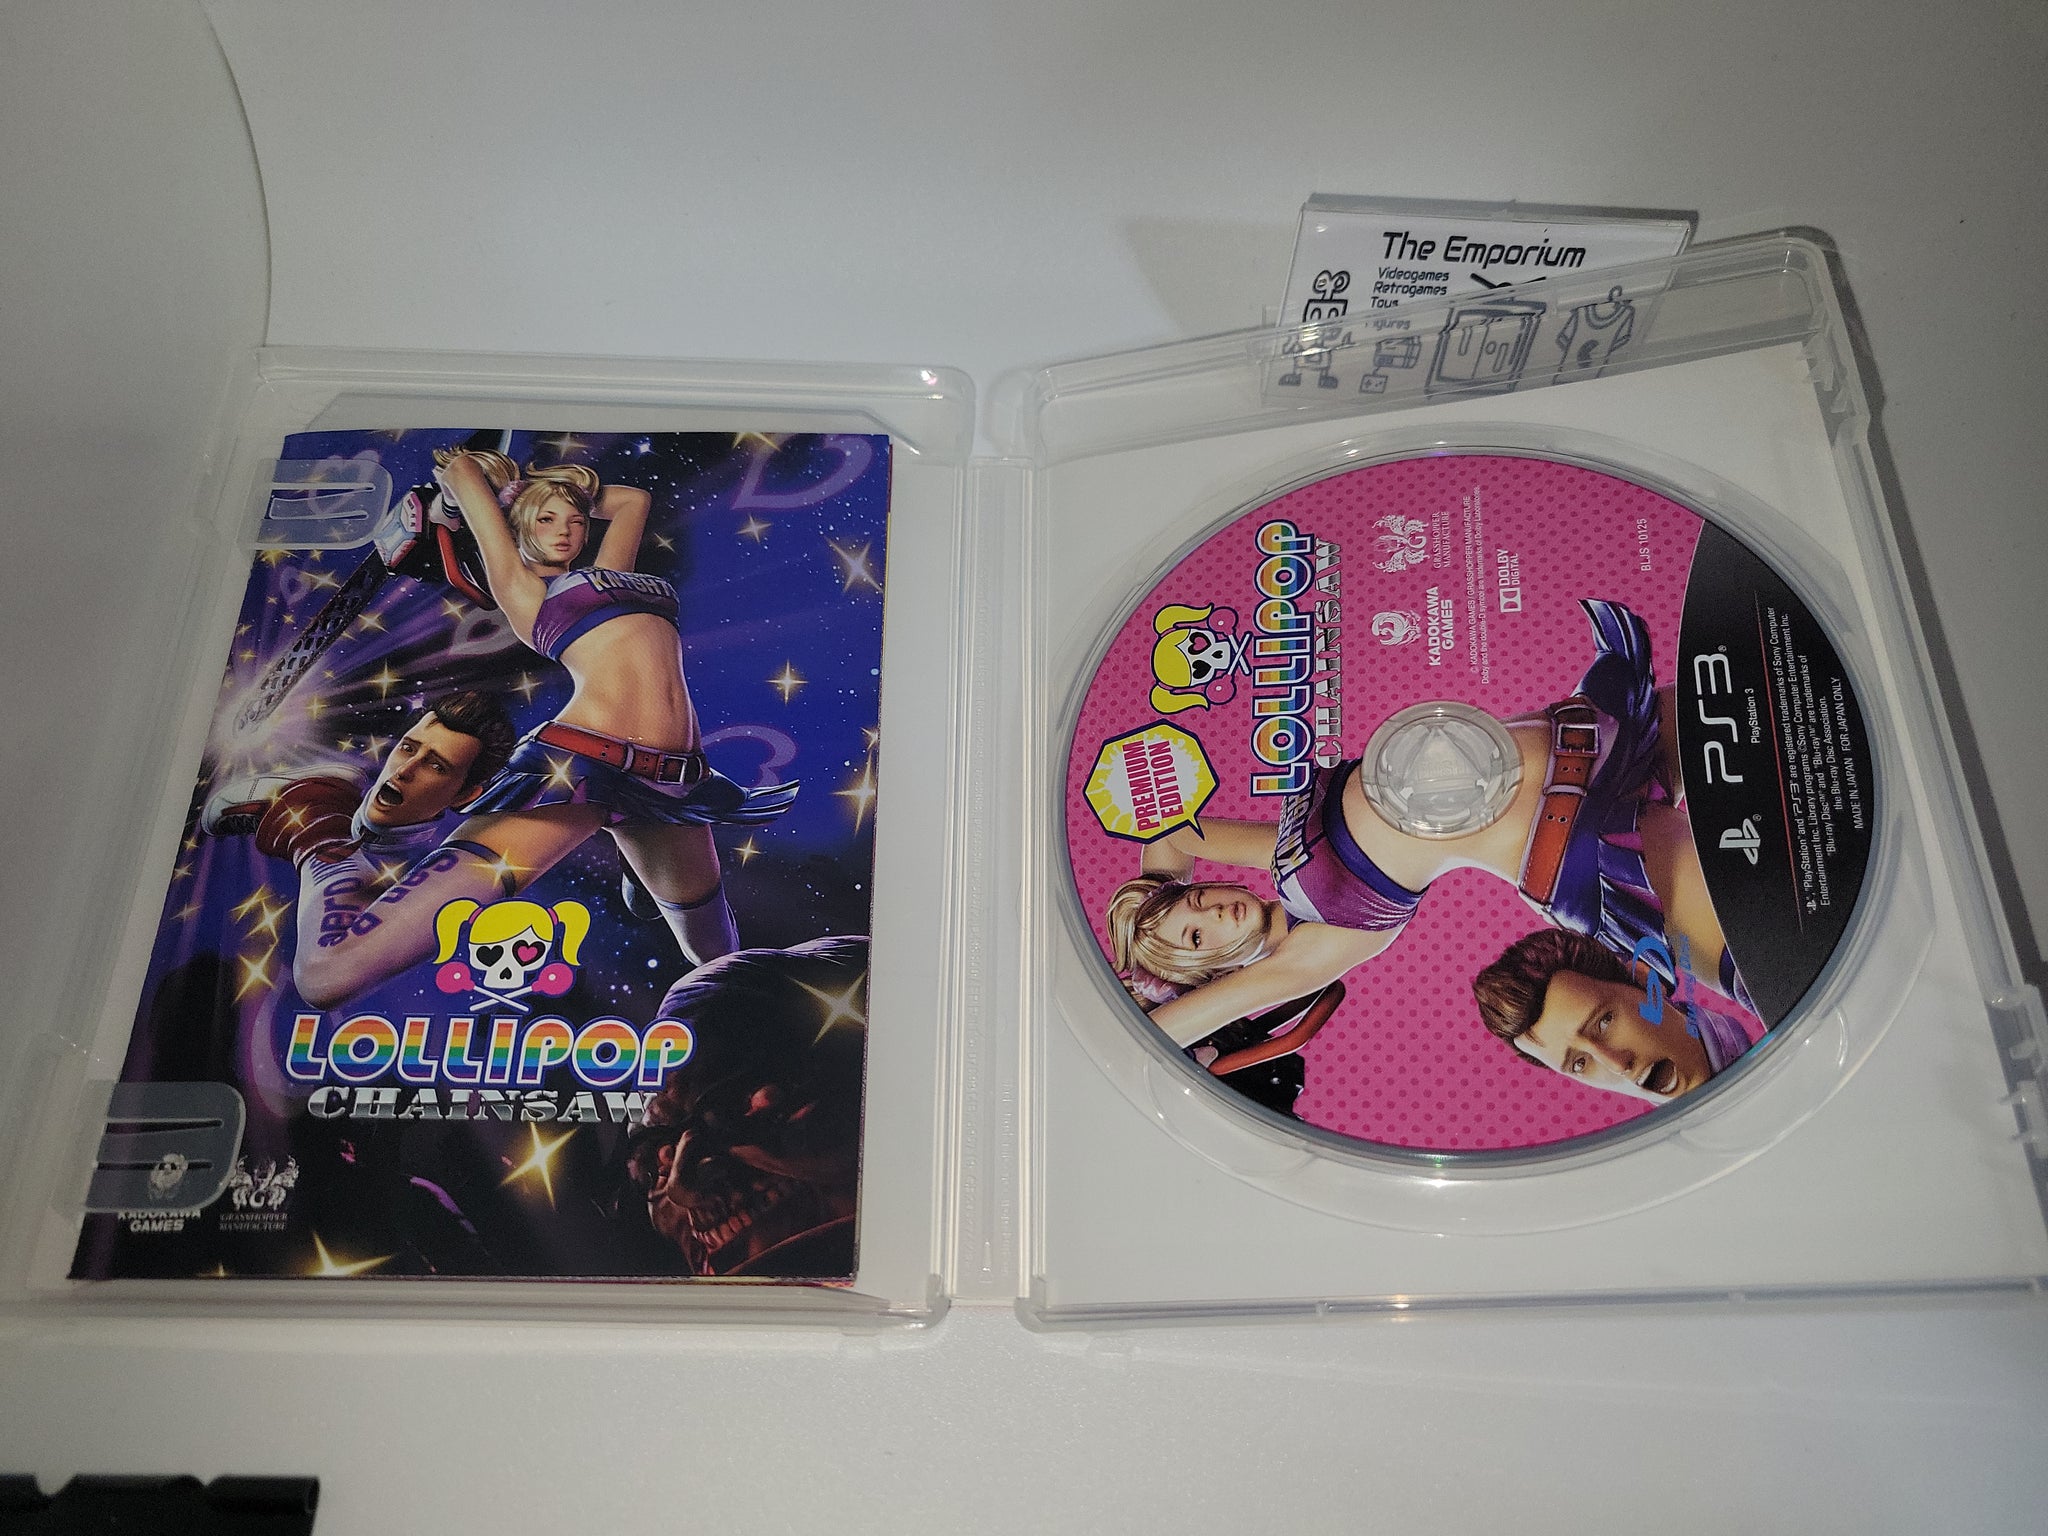 PlayStation 3 LOLLIPOP CHAINSAW Premium Edition PS3 Japanese version Video  Game 4582350660029